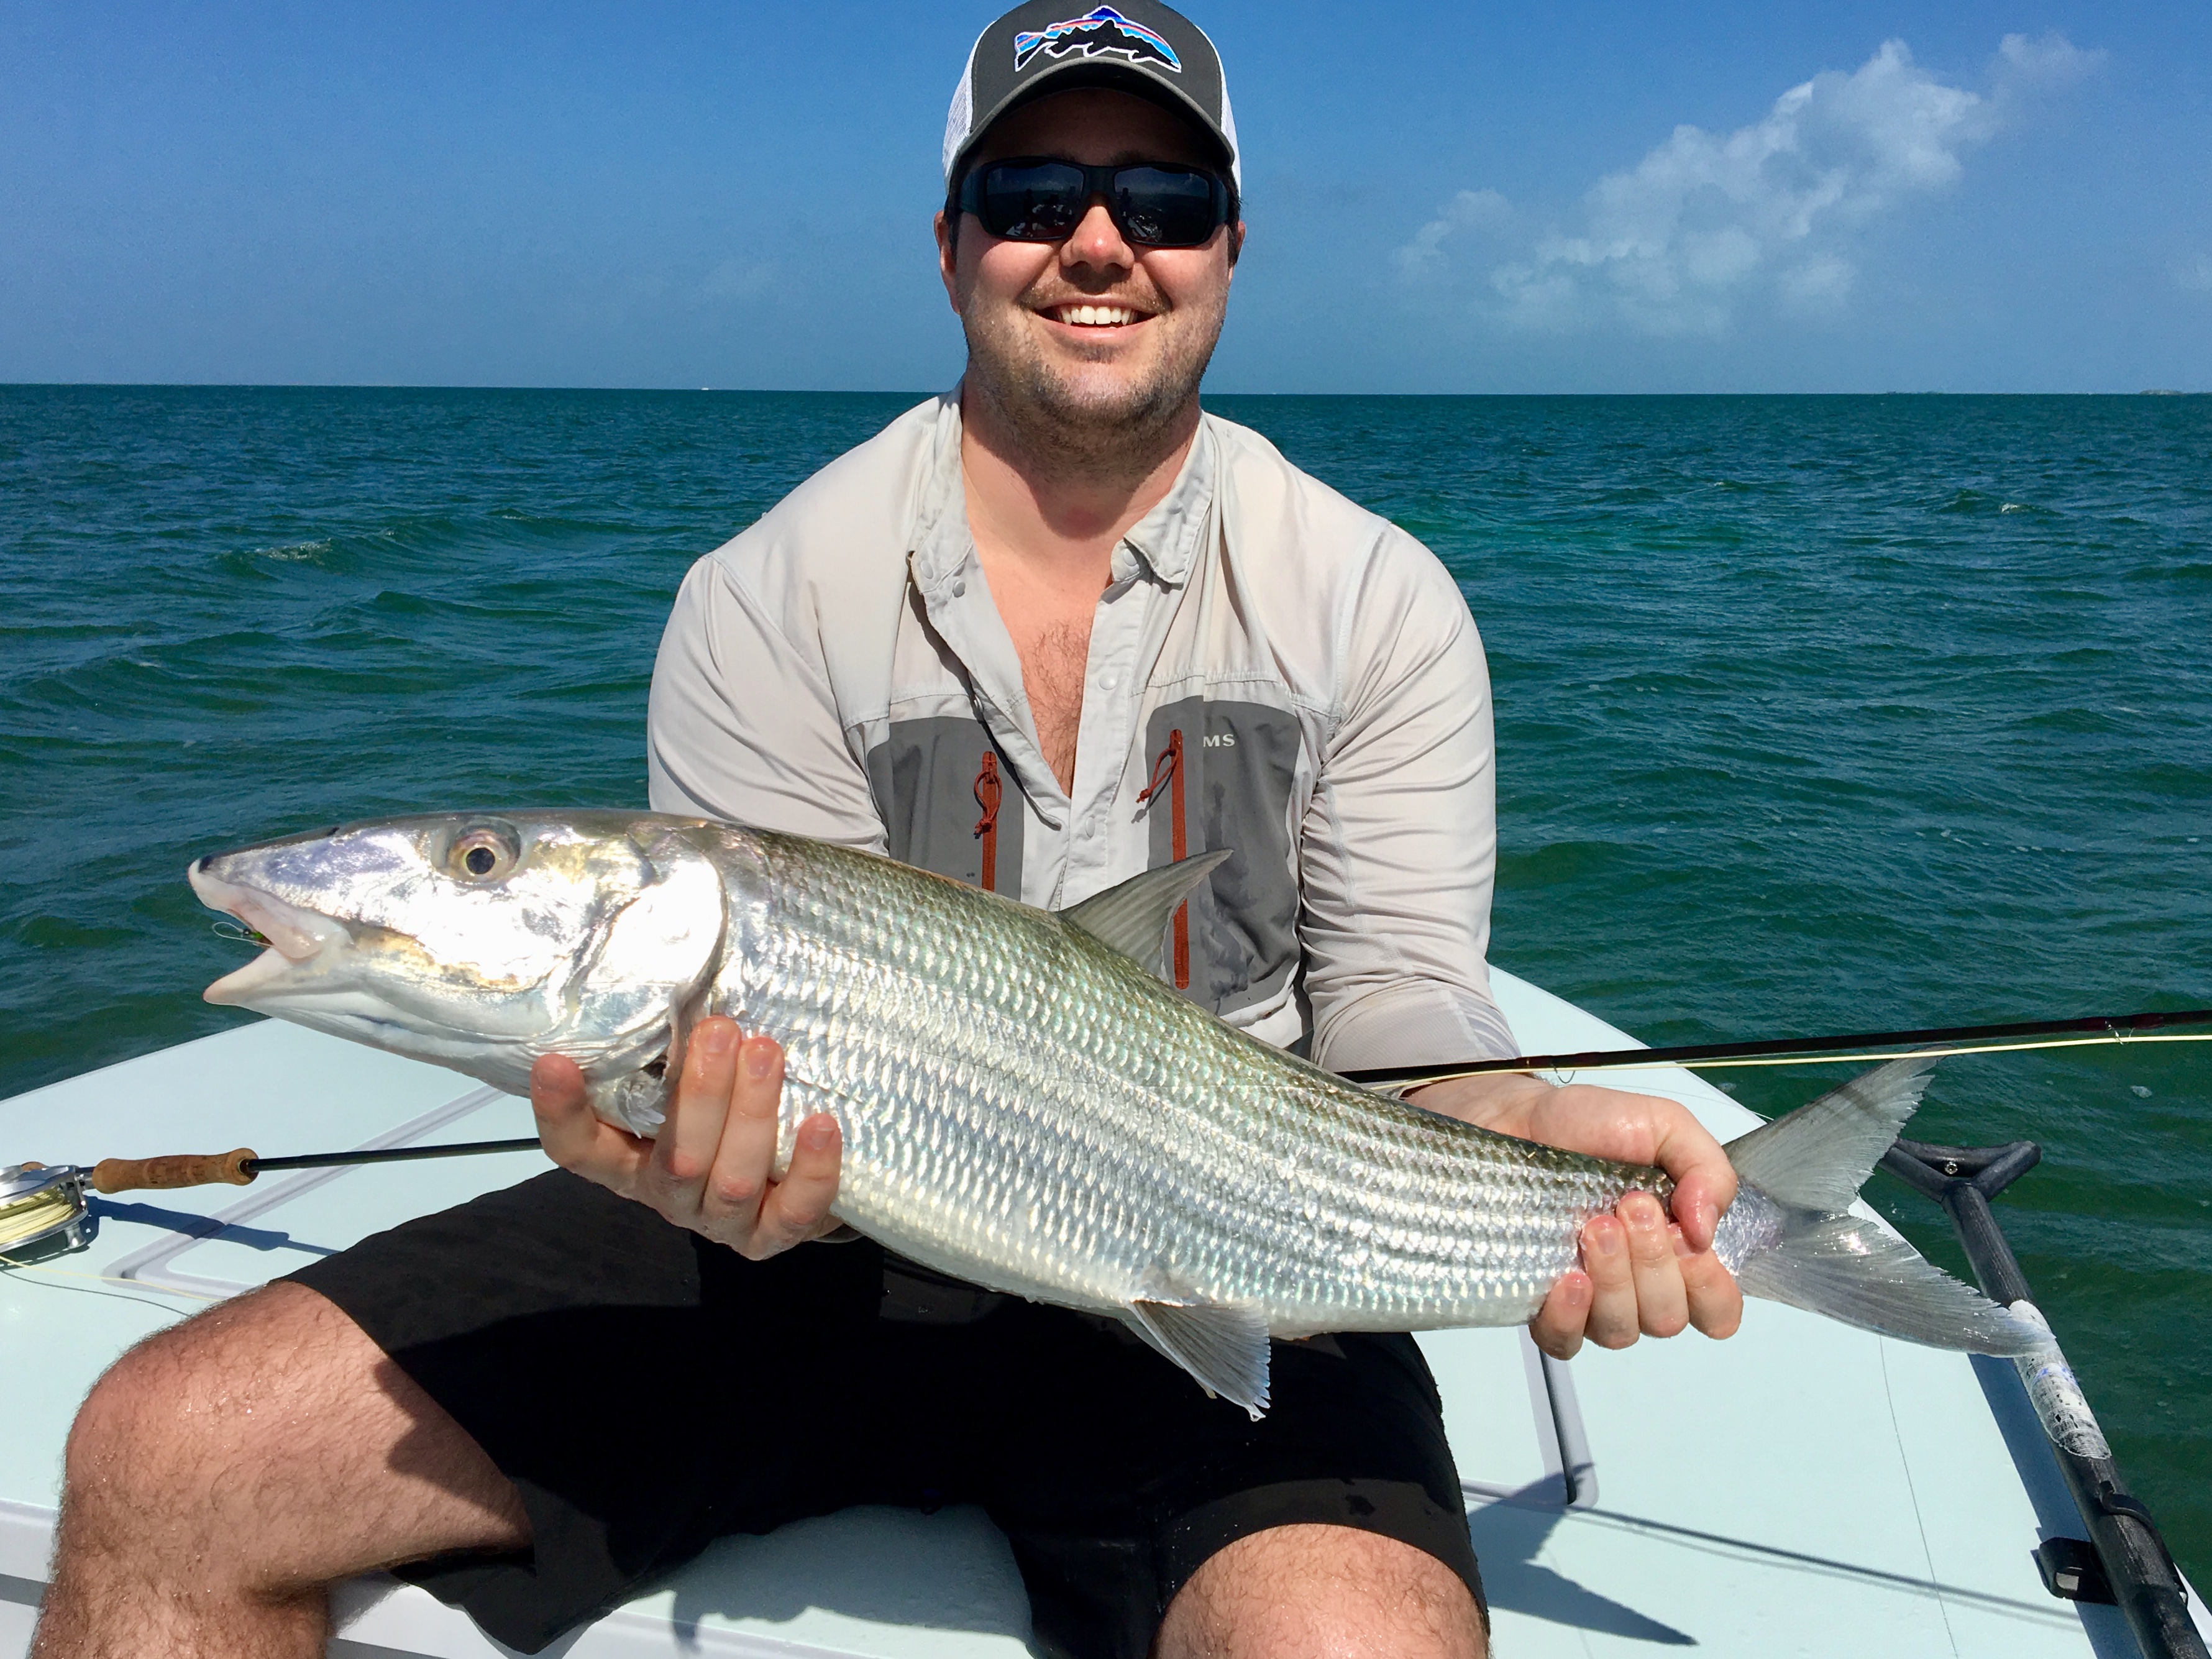 Fly fishing South Florida: there’s no place like home